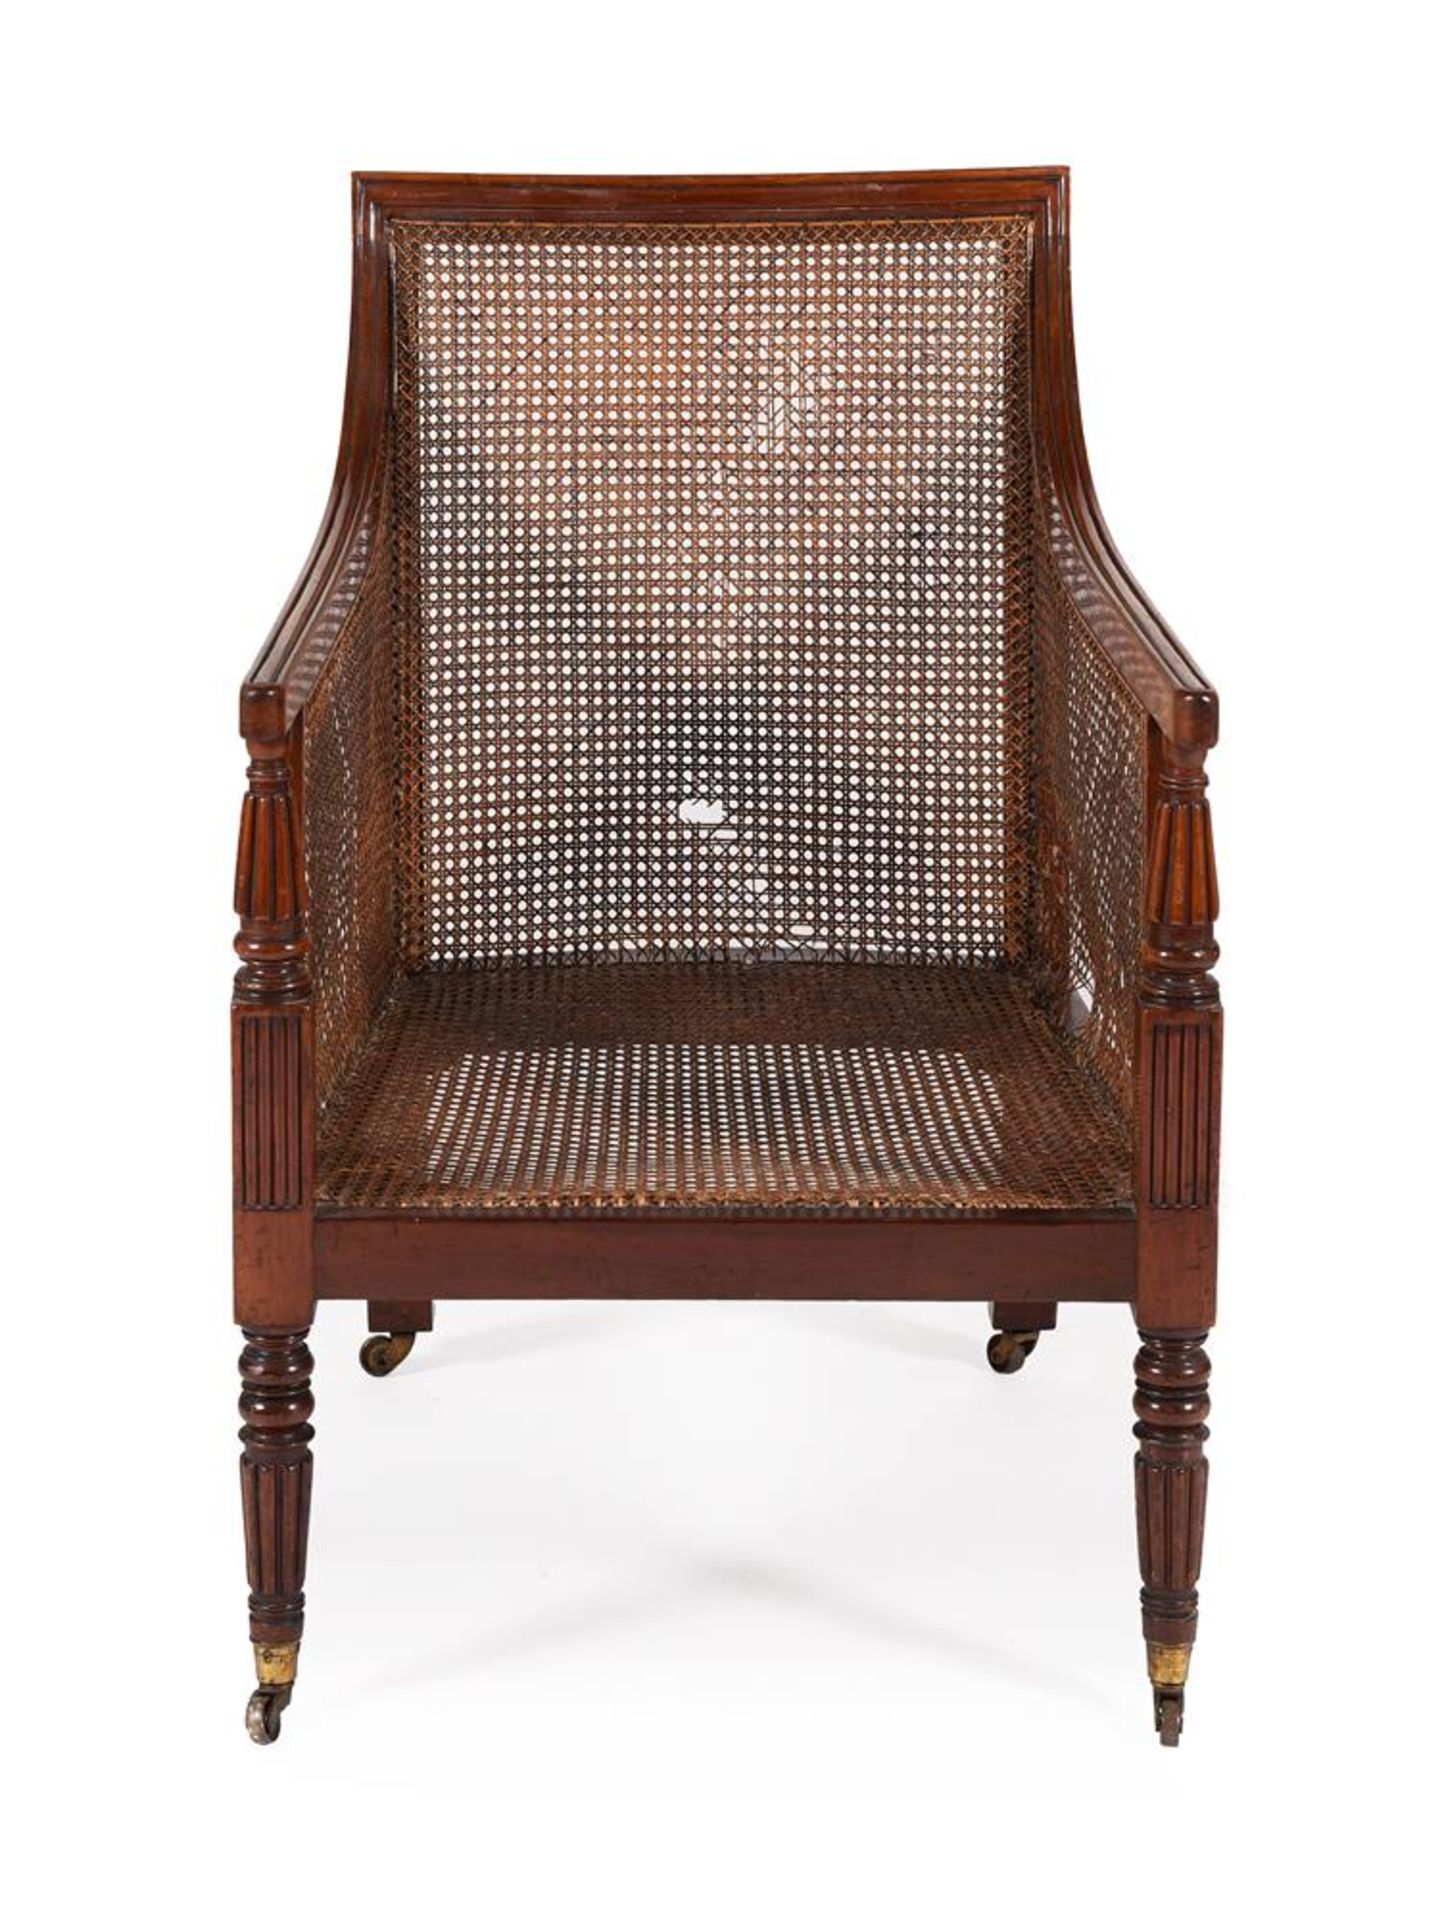 A GEORGE IV MAHOGANY LIBRARY ARMCHAIR IN THE MANNER OF GILLOWS - Image 6 of 7